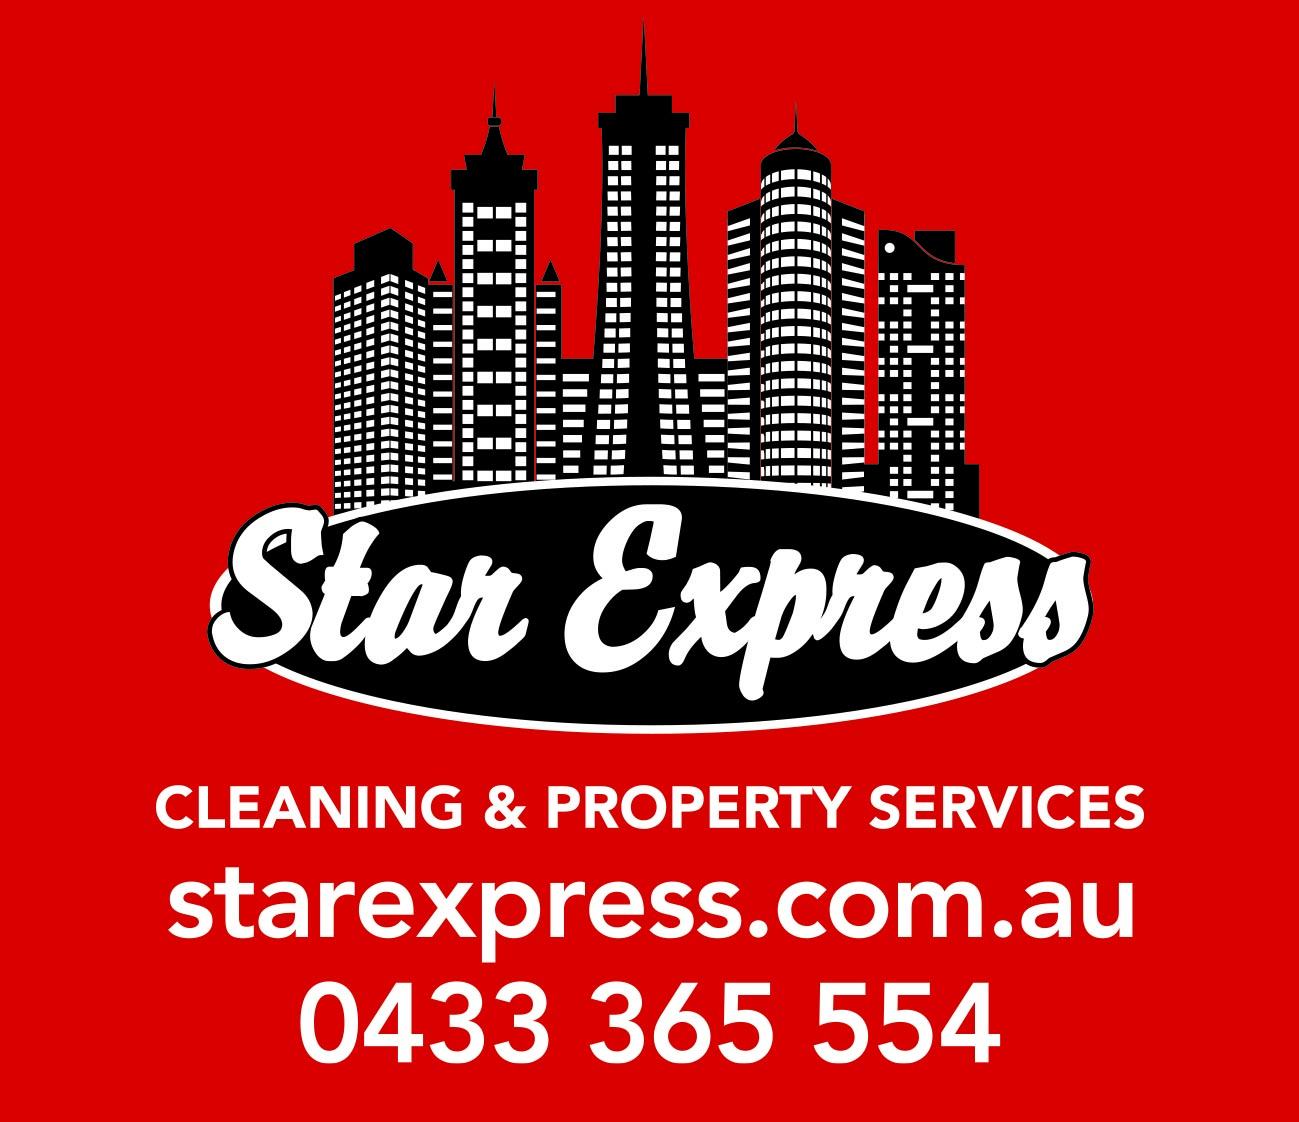 Star Express Cleaning & Property Services